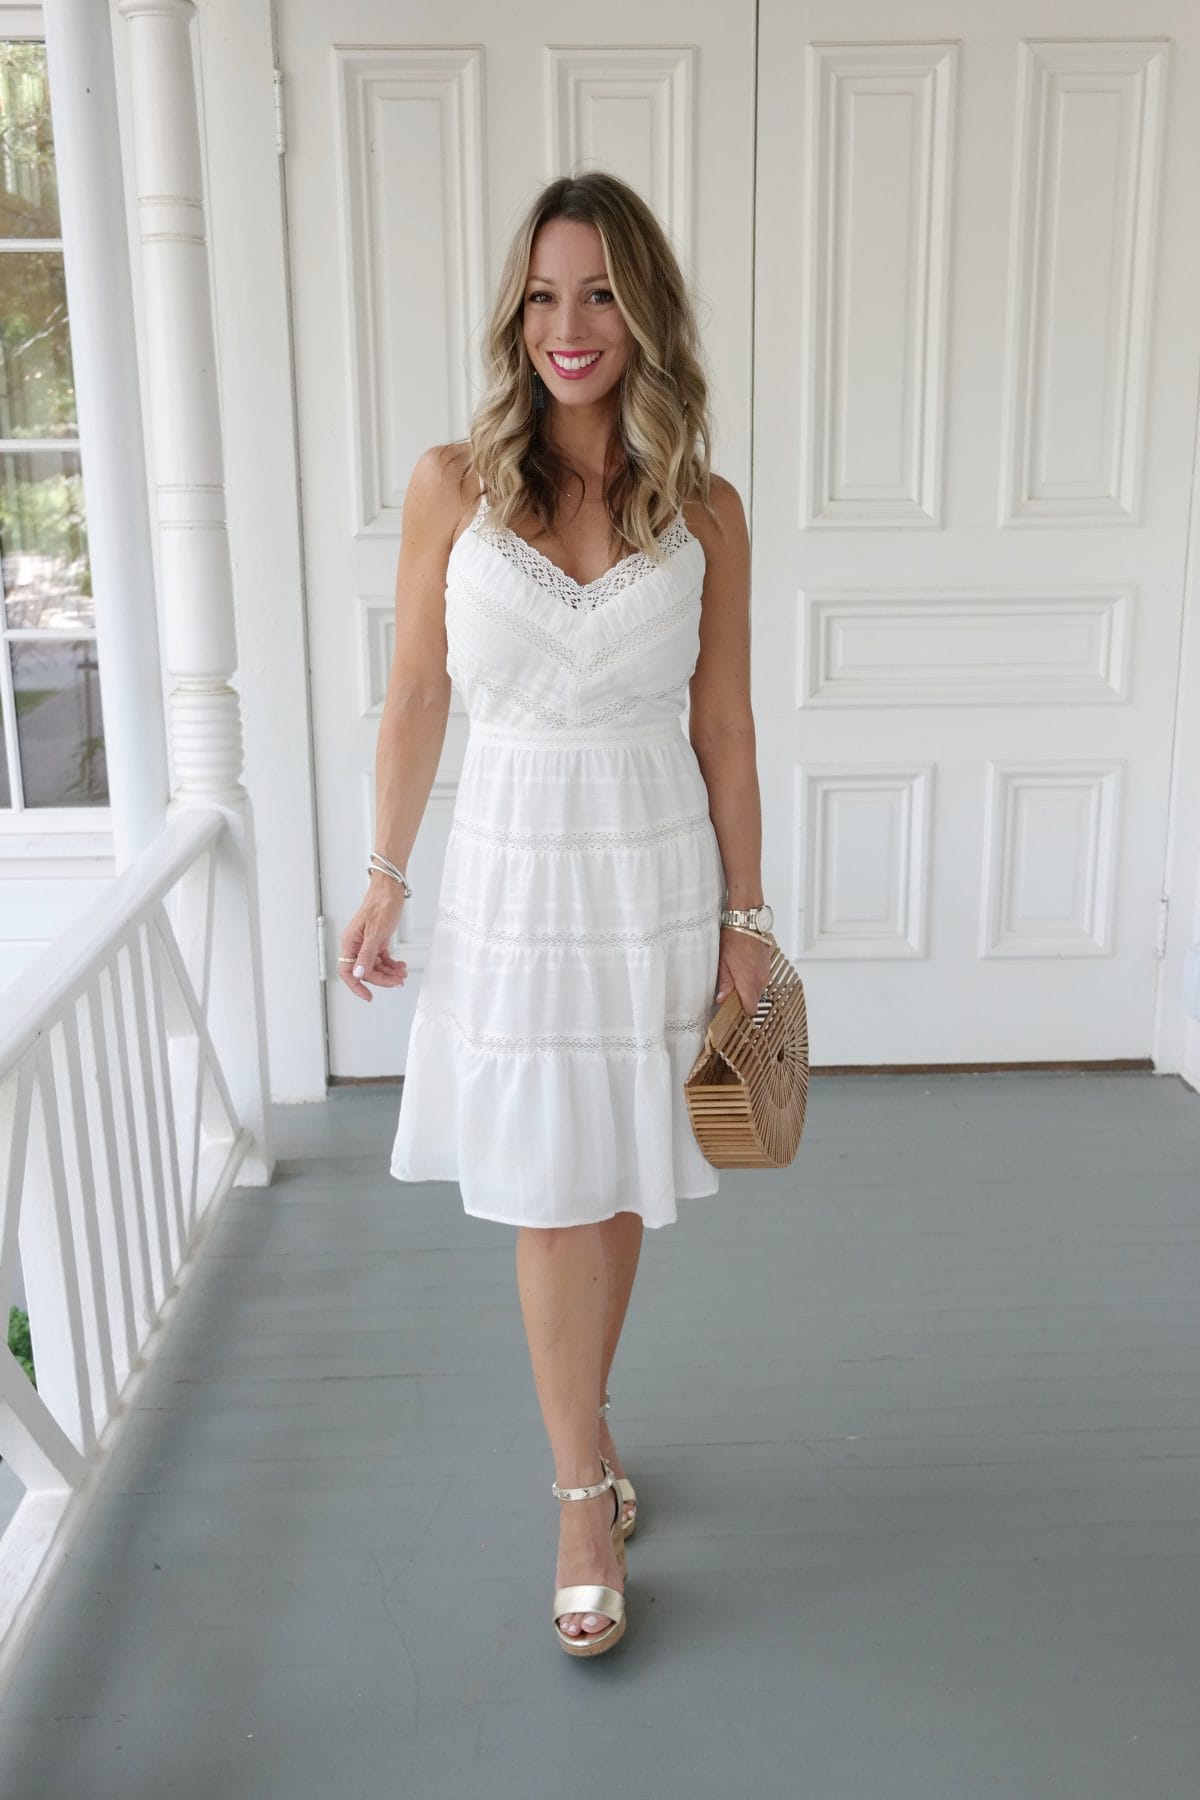 Spring and Summer outfit - white sundress and wedges